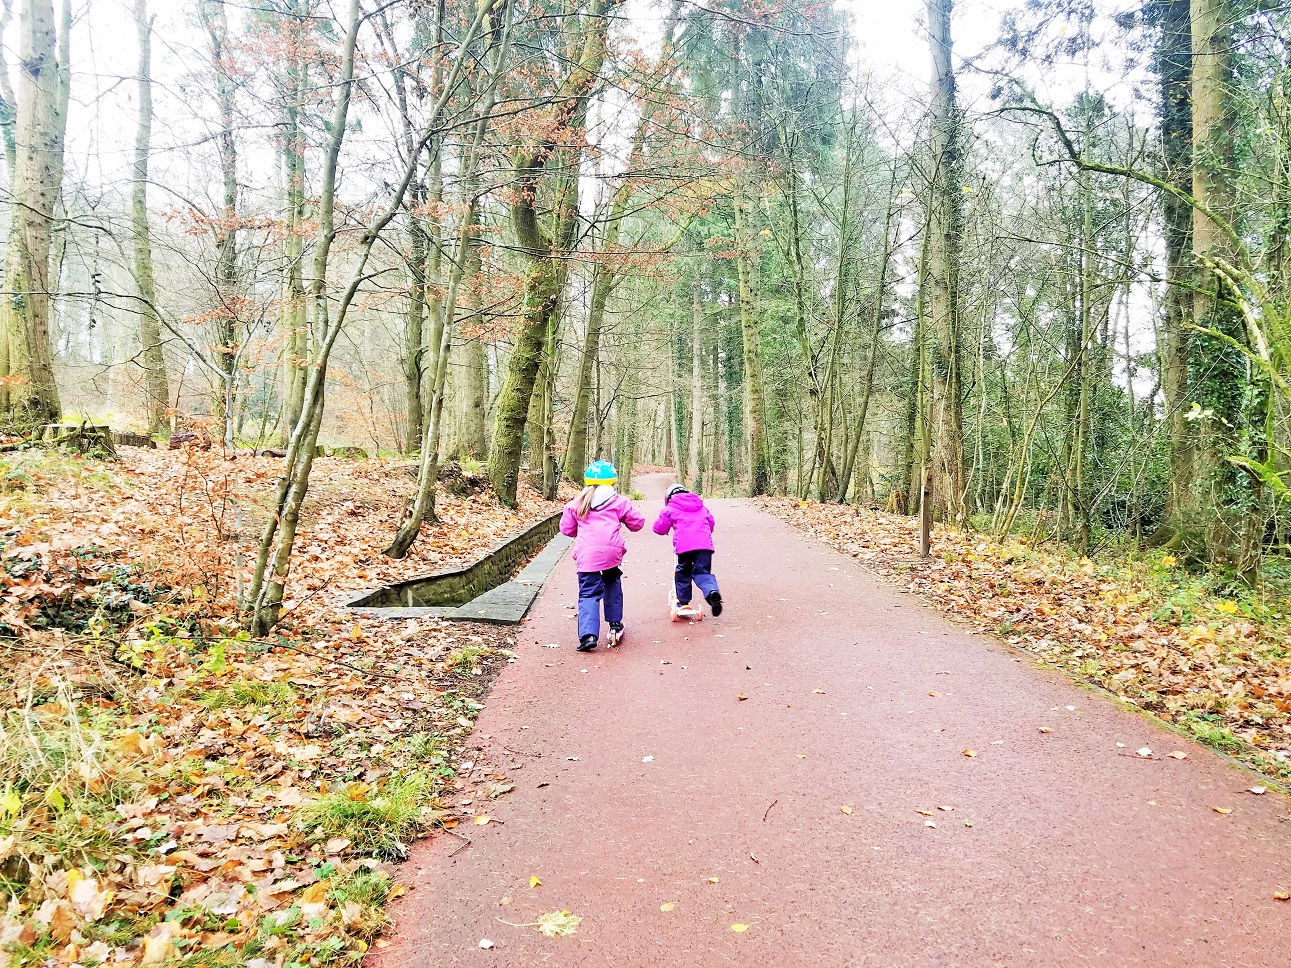 attachment parenting vs gentle parenting - two children on scooters in autumn